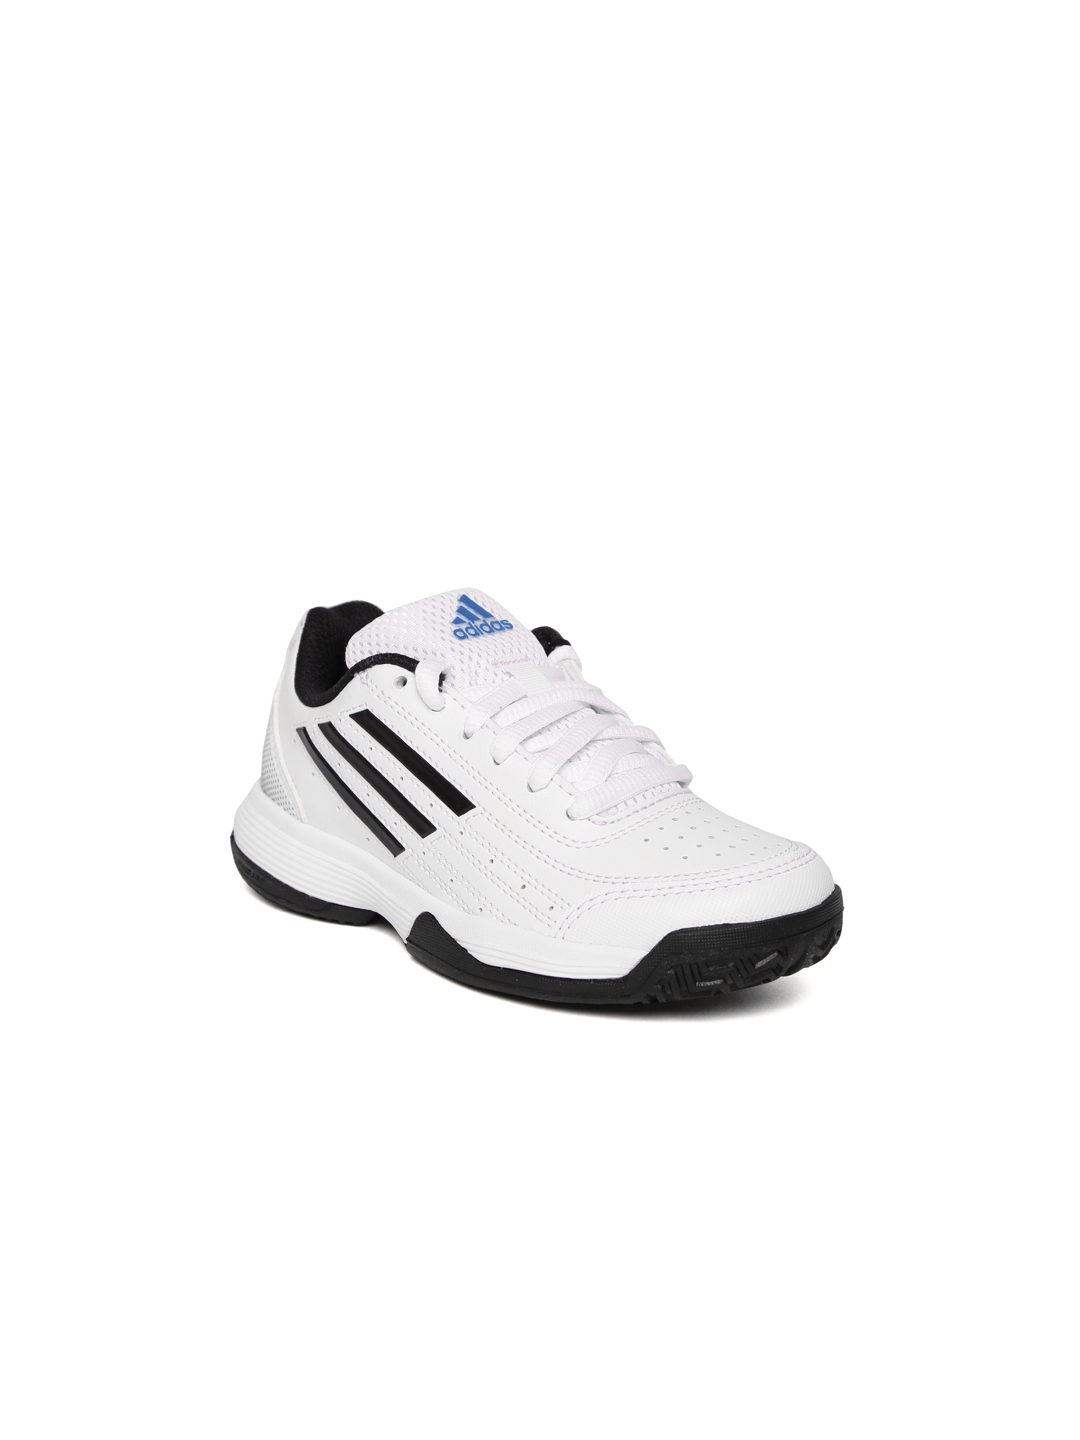 adidas sonic attack tennis shoes